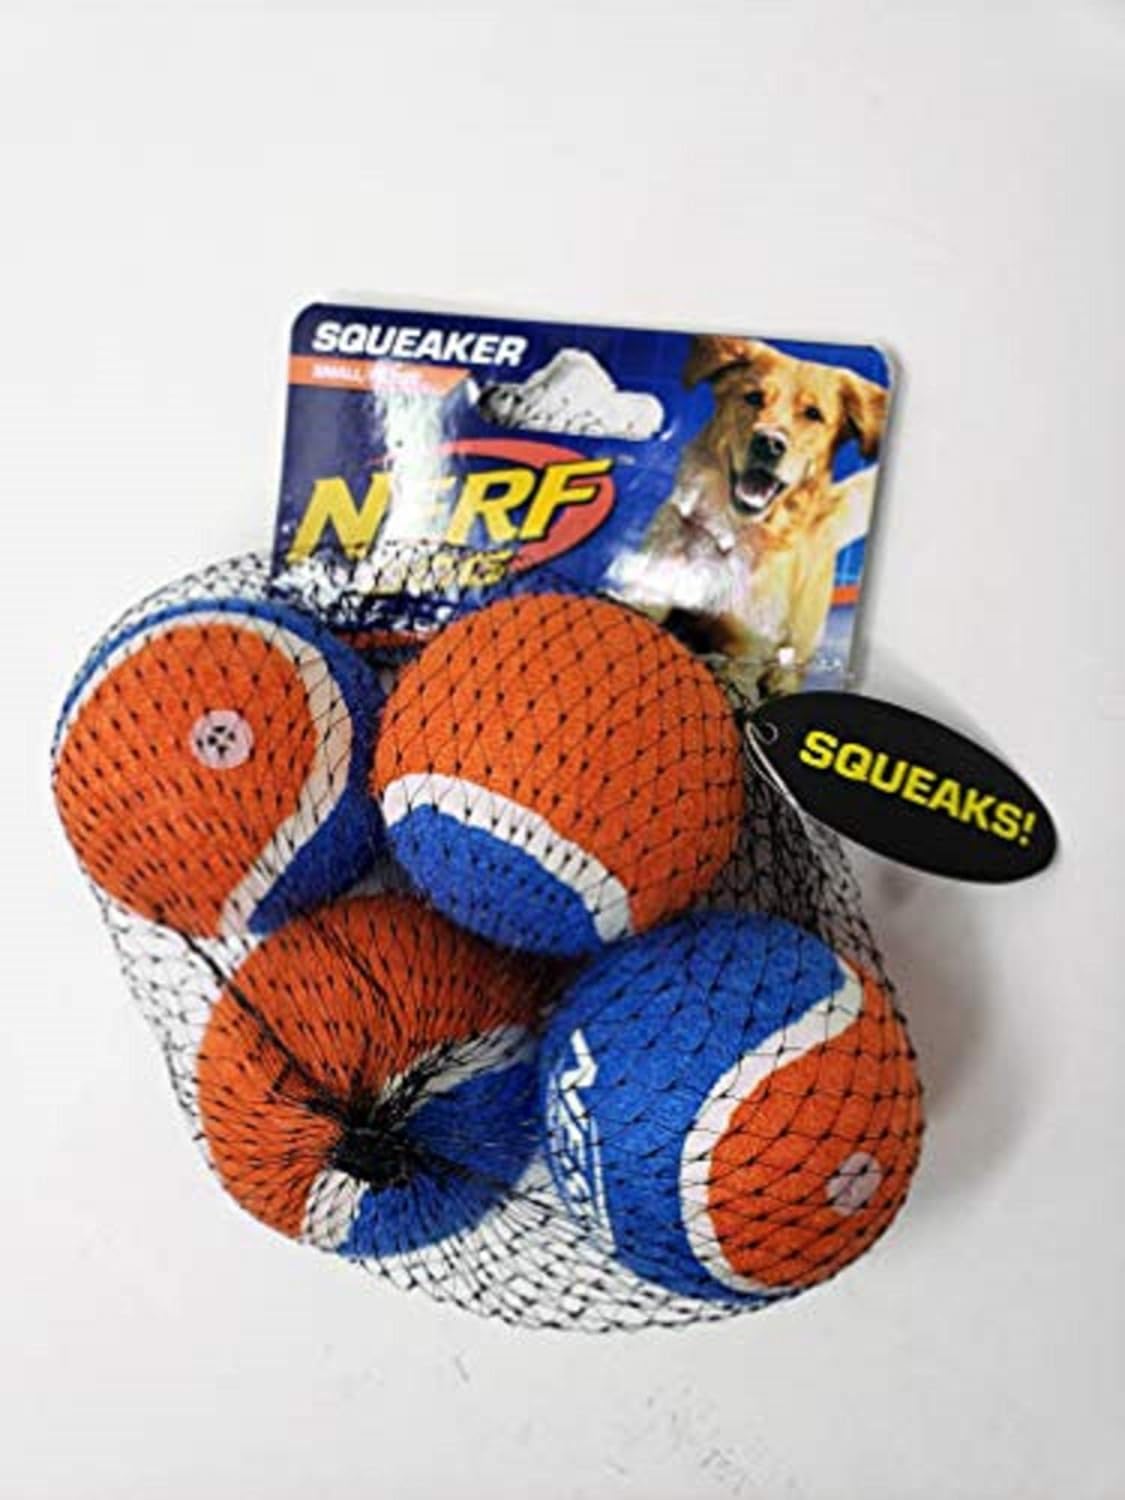 We bought a couple of these a few months ago for our little dog. He chews through everything- including tennis balls. These are not like tennis balls. He doesn't even try to chew through them. They are sturdy and solid. He LOVES them. He keeps one in the backyard and chases it around every bathroom visit outside. It is small enough he can throw it himself, has a good bounce when it even hits the grass, and easy to clean off if you go to bring it inside. We decided to buy more since we lost one over the fence one day. This price was way lower than the $14 we paid in the store. We are very pleased with this purchase.